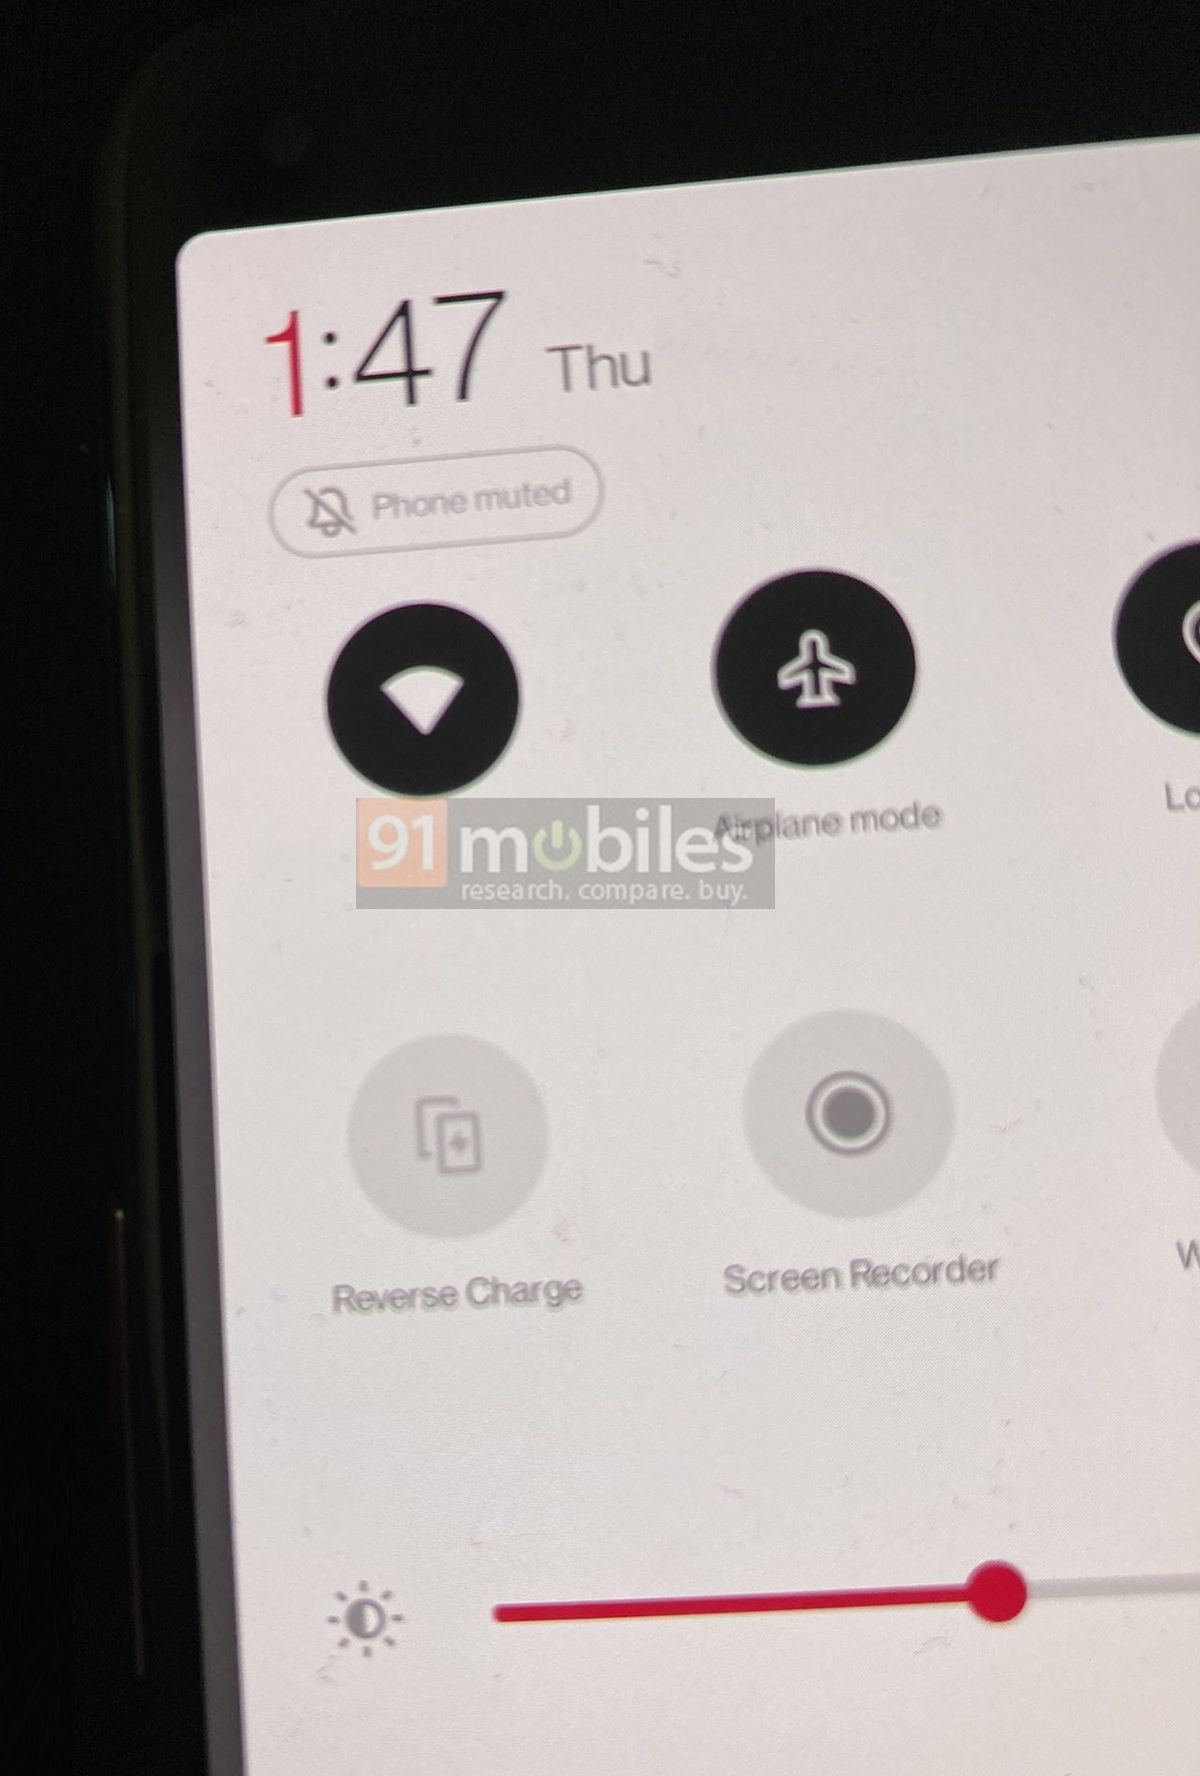 Alleged OnePlus 9 91mobiles 1